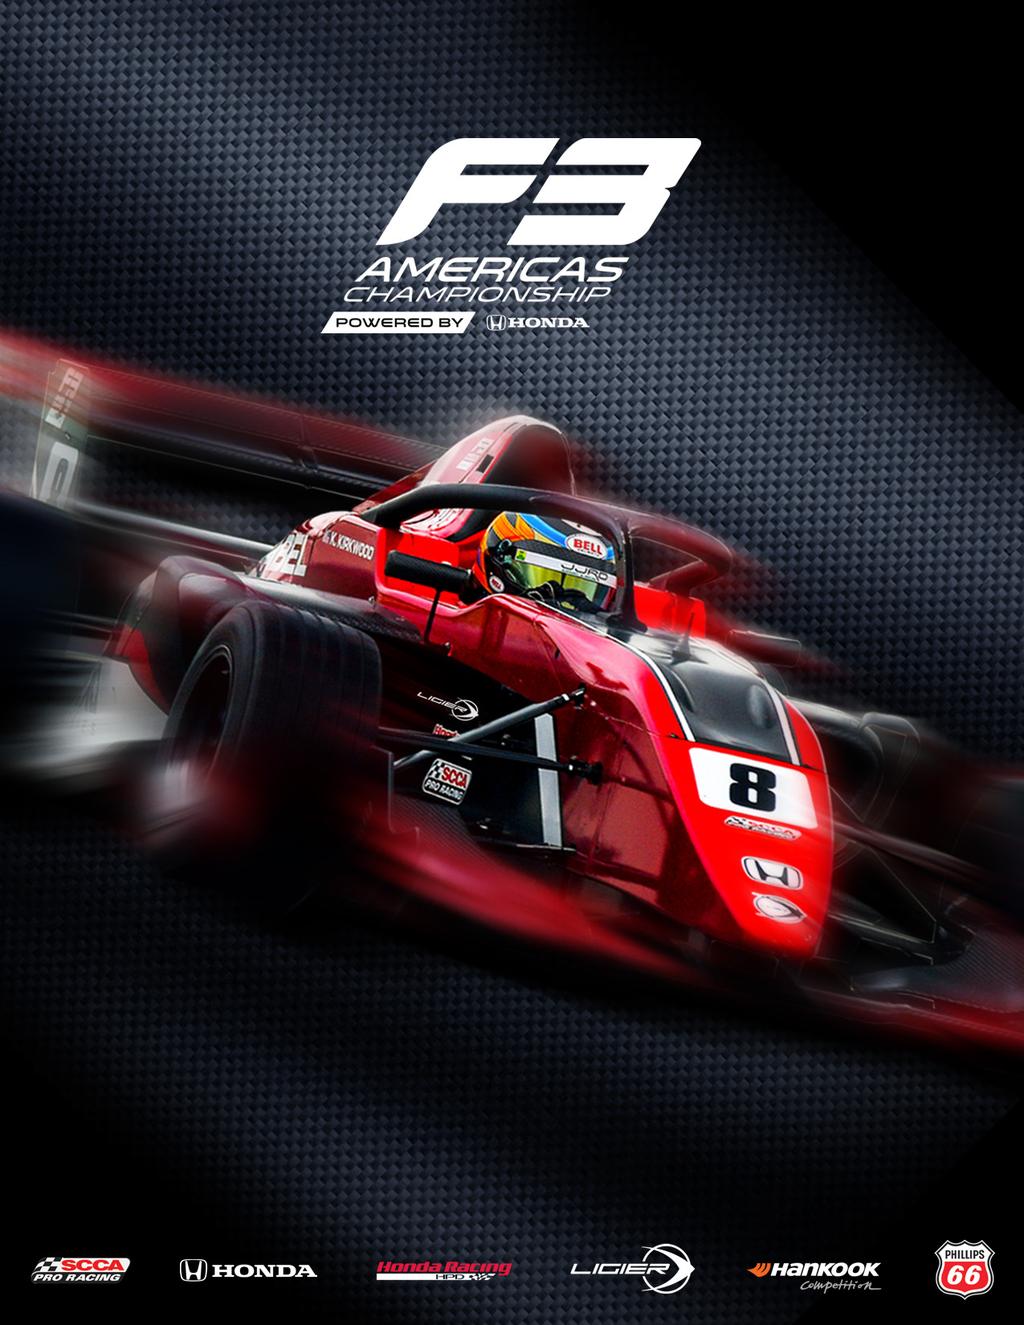 2019 F3 Americas Media Guide REDEFINING GLOBAL RACING With innovations in safety and affordability, the F3 Americas Championship is designed to attract the